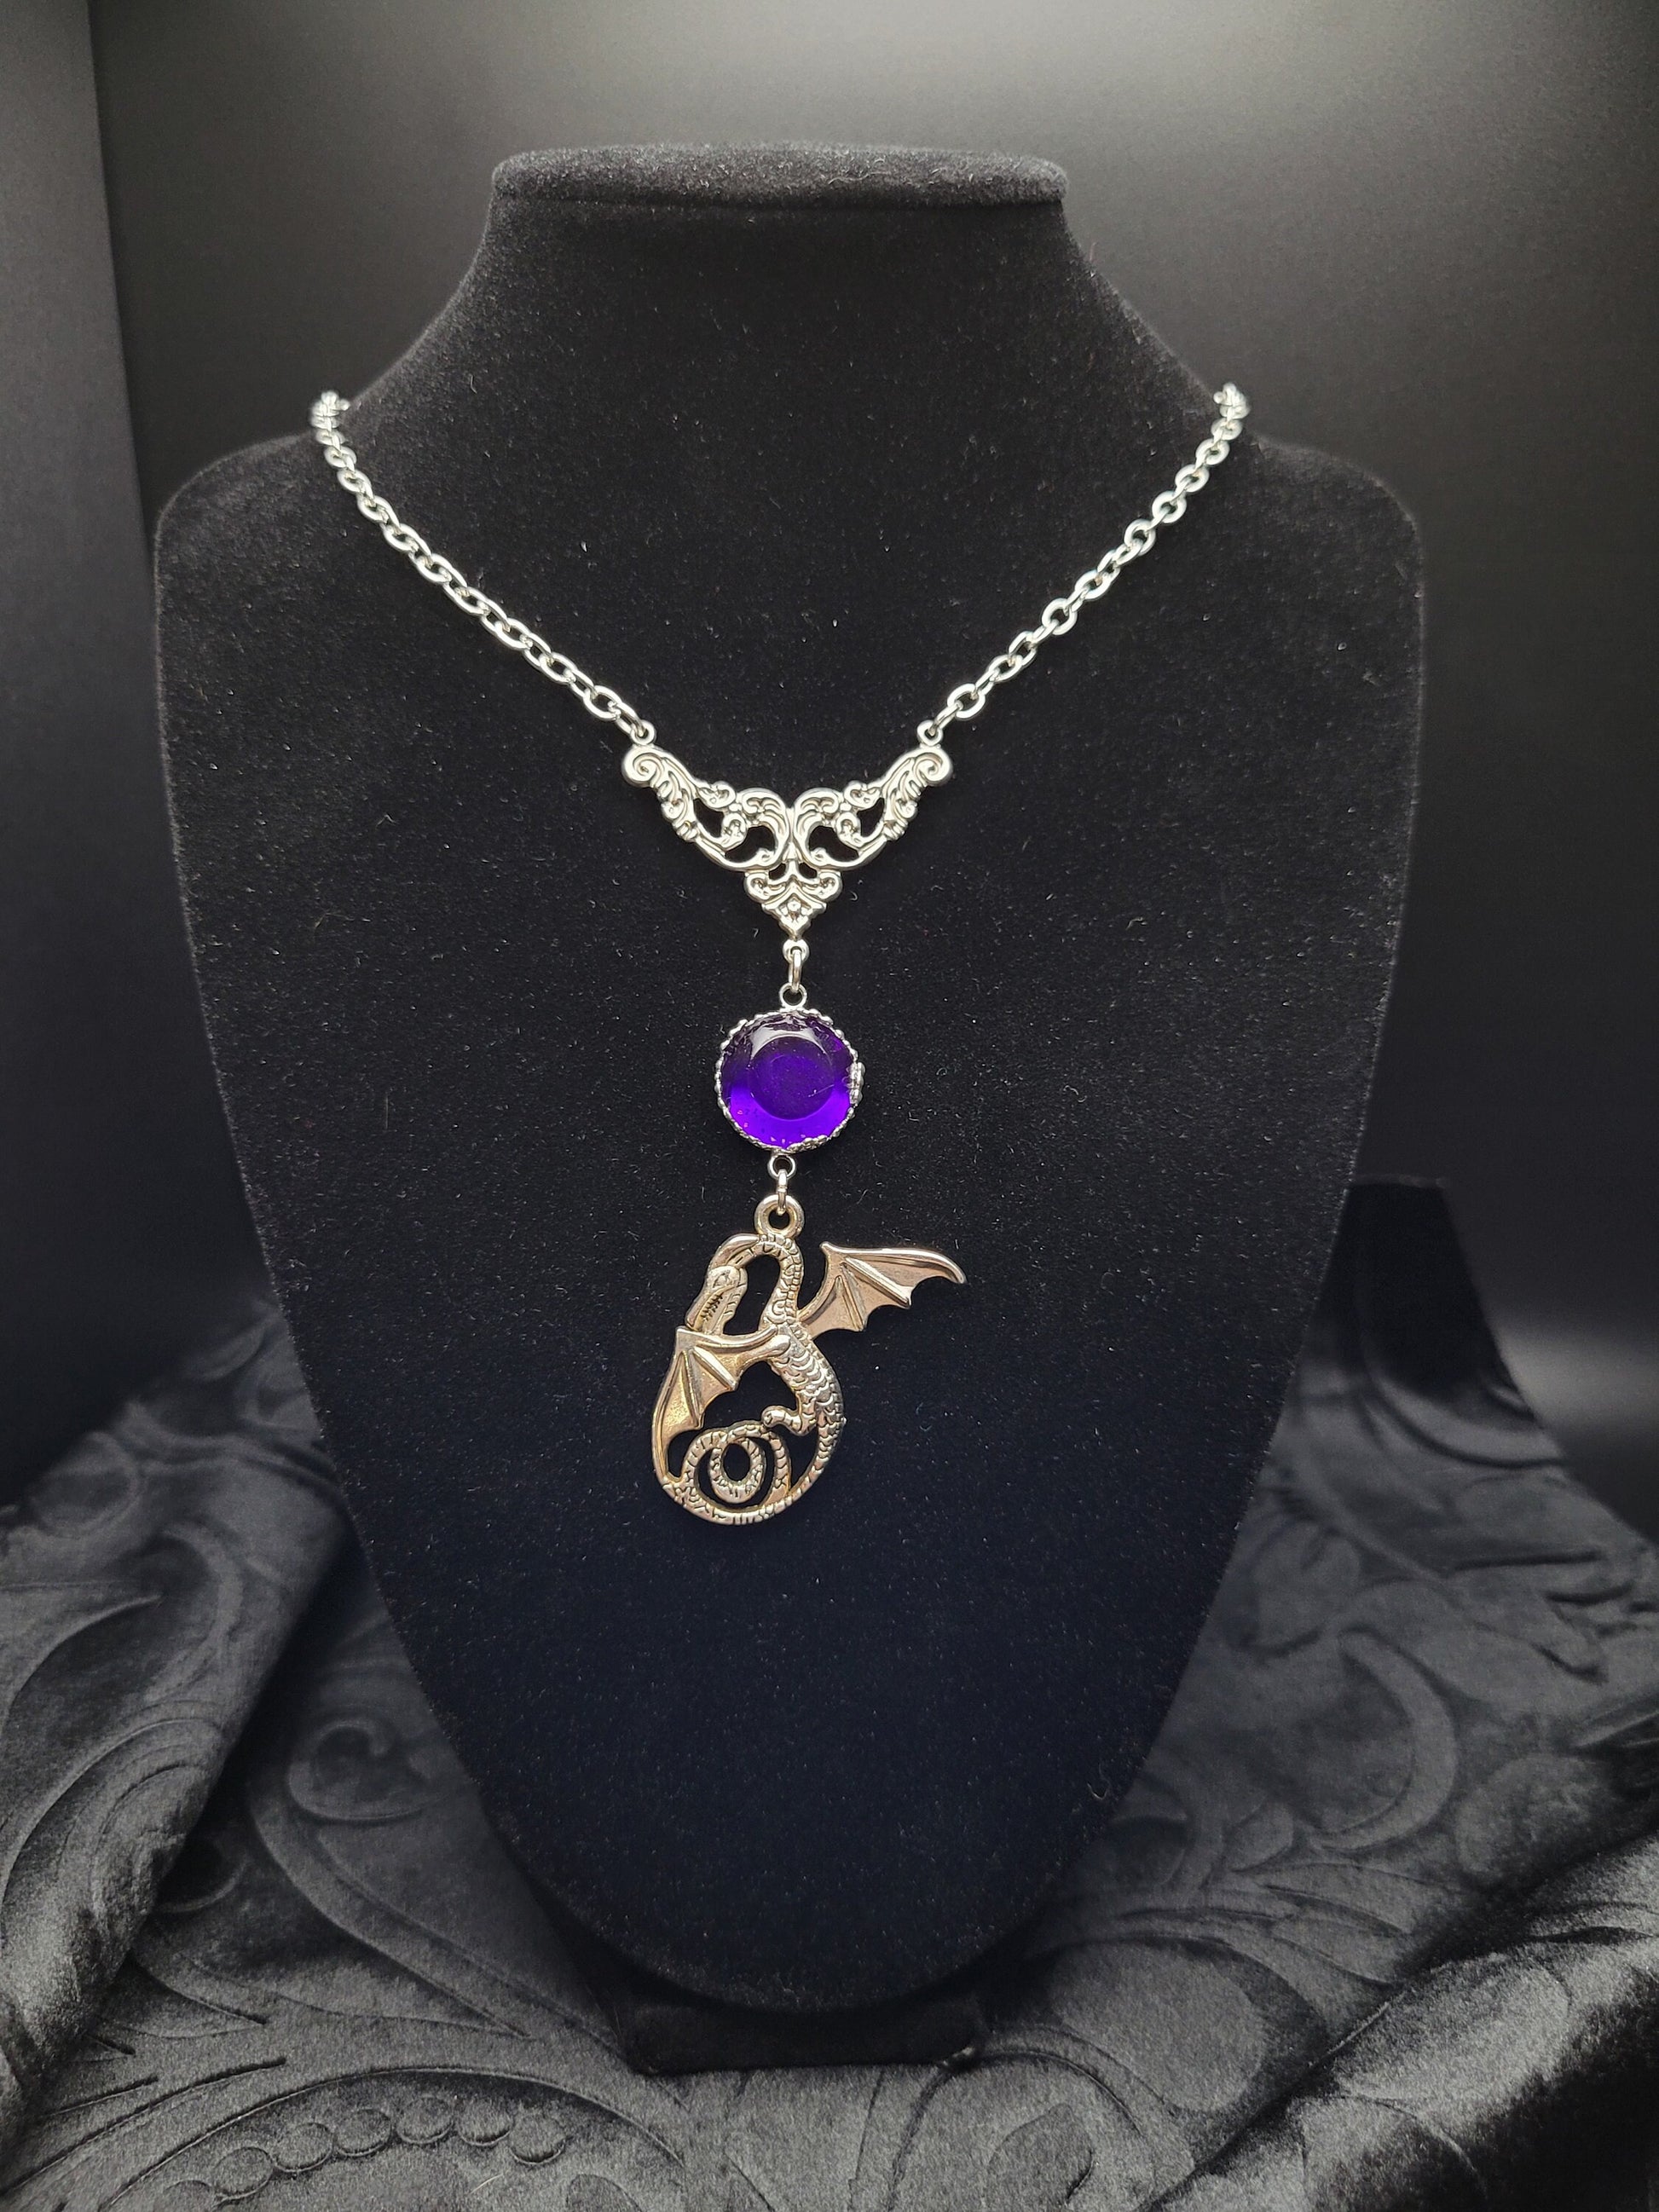 Purple and Silver Fantasy Filigree Dragon RPG DND Necklace with Resin Cabochon